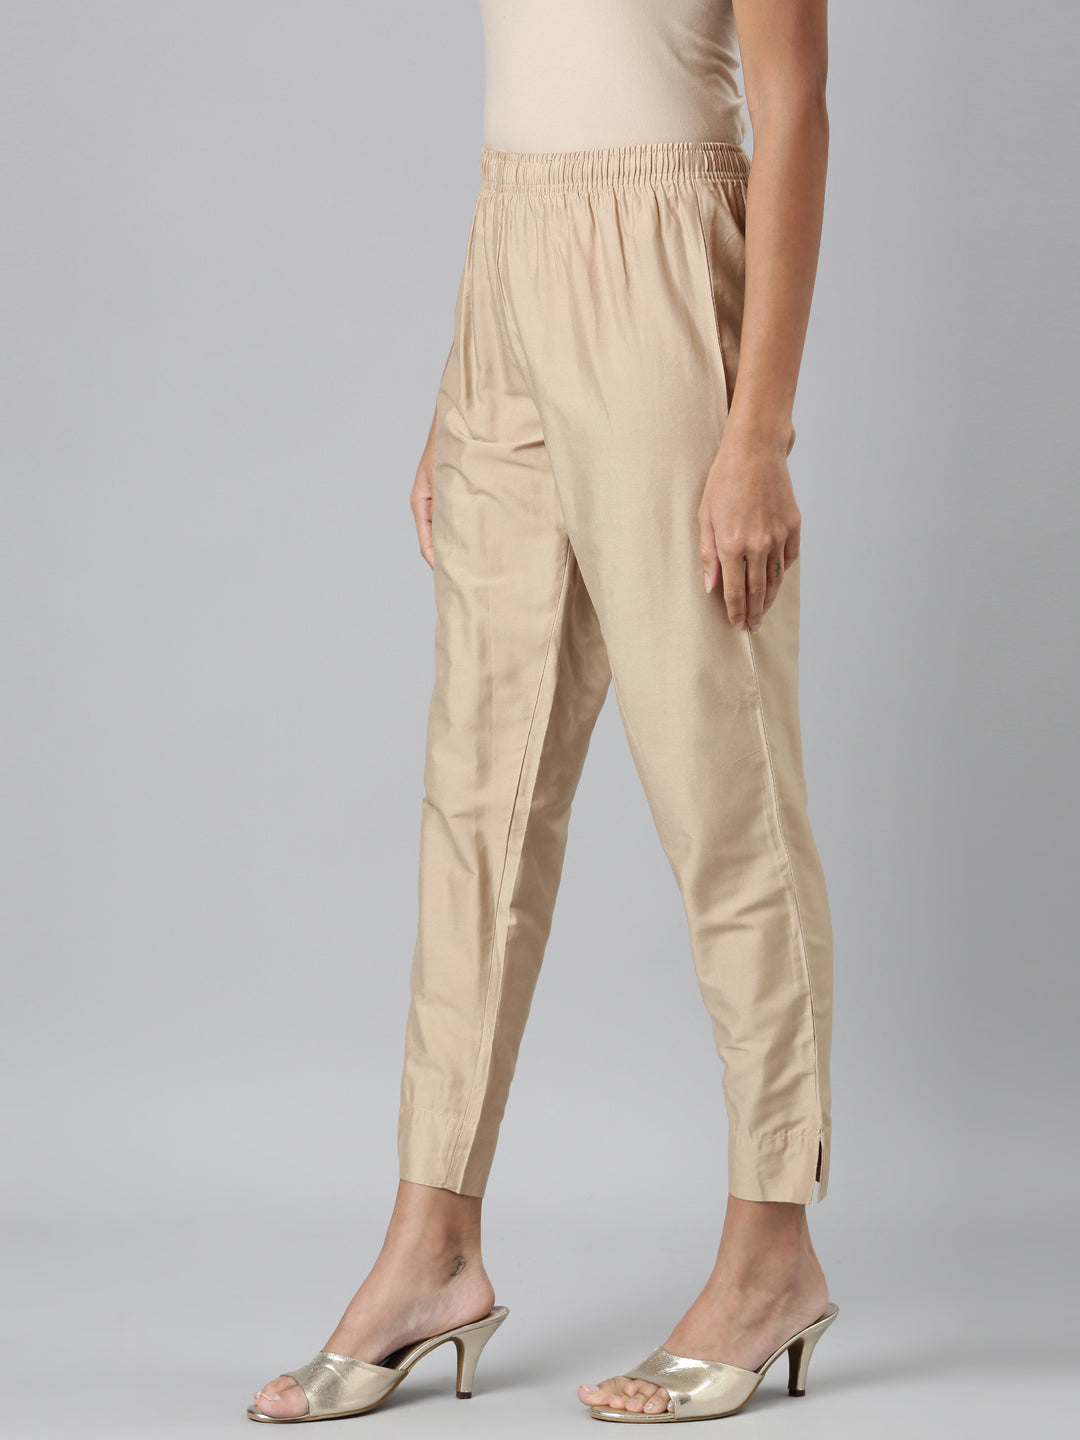 Golden Velvet French Wide Leg Velvet Pants With Wide Leg And Pocket Relaxed  And Loose Fit Trousers For Summer From Gregsmith, $17.77 | DHgate.Com